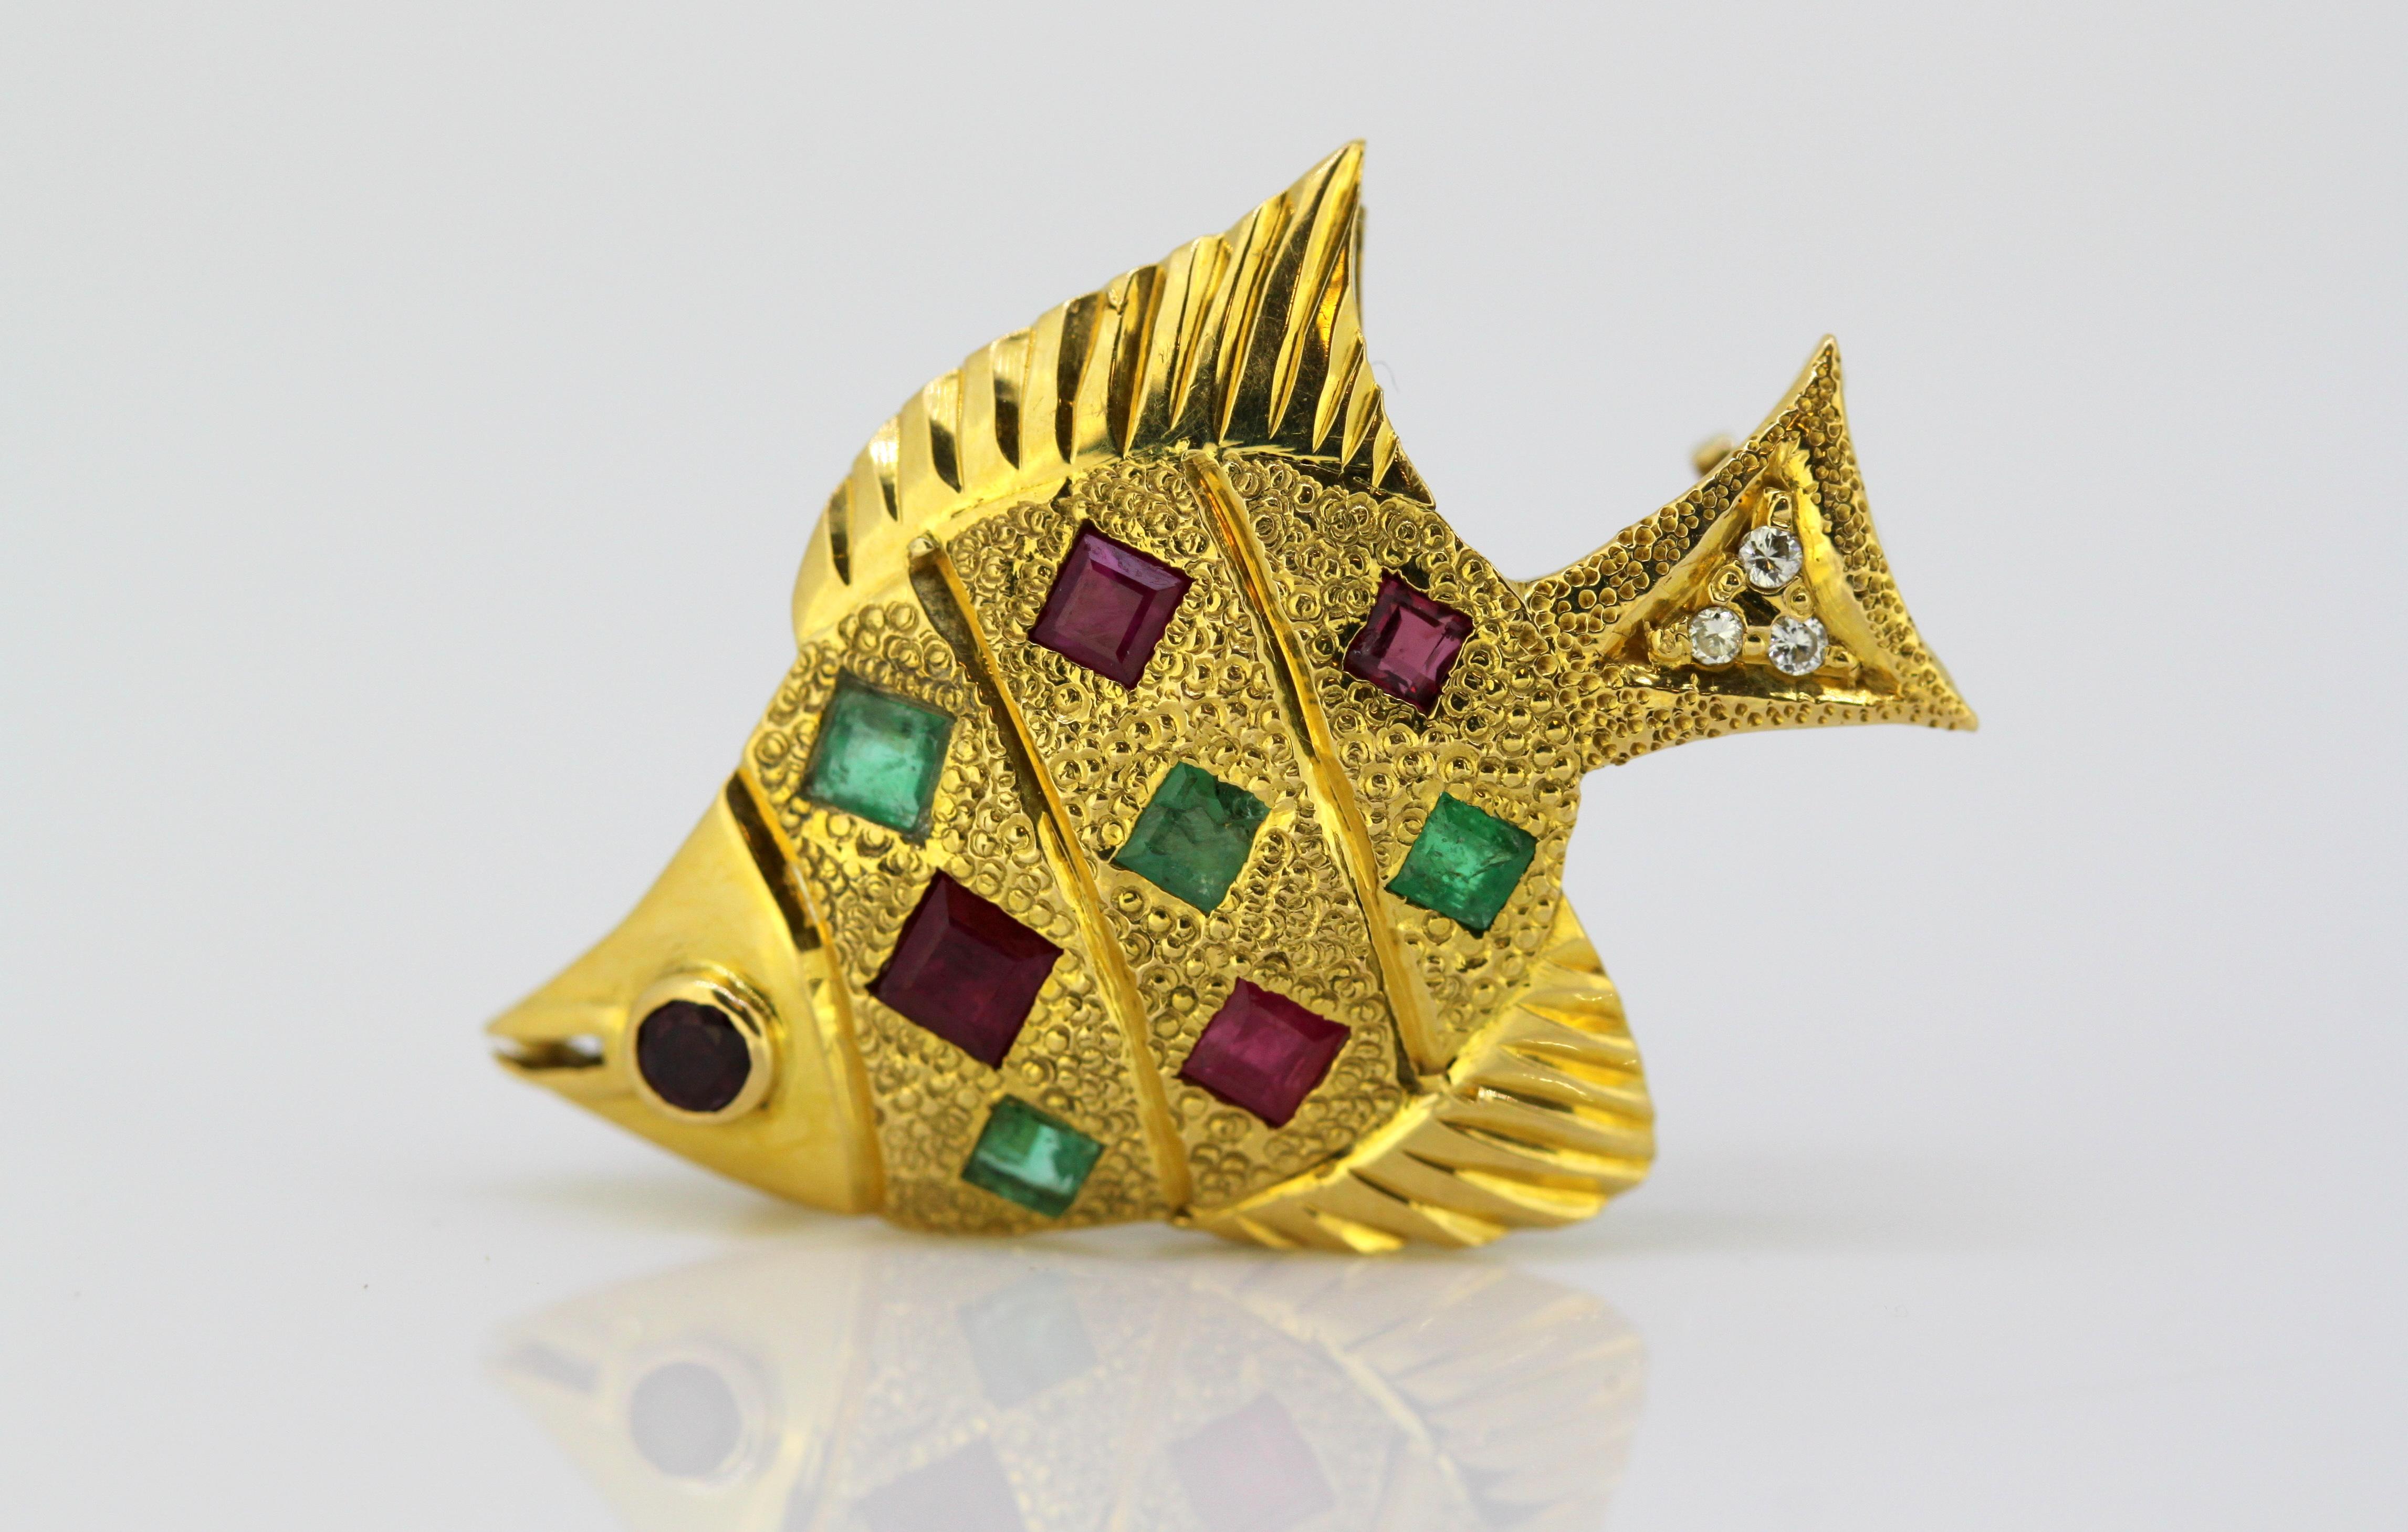 Vintage 18k gold brooch/pendant in the shape of a fish, decorated with emeralds, rubies, and diamonds.
Circa 1970's
Hallmarked 750.

Approx Dimensions - 
Size : 2.7 x 2 x 1 cm
Weight : 5 grams

Emerald - 
Cut : Square
Number of stones : 4
Total size